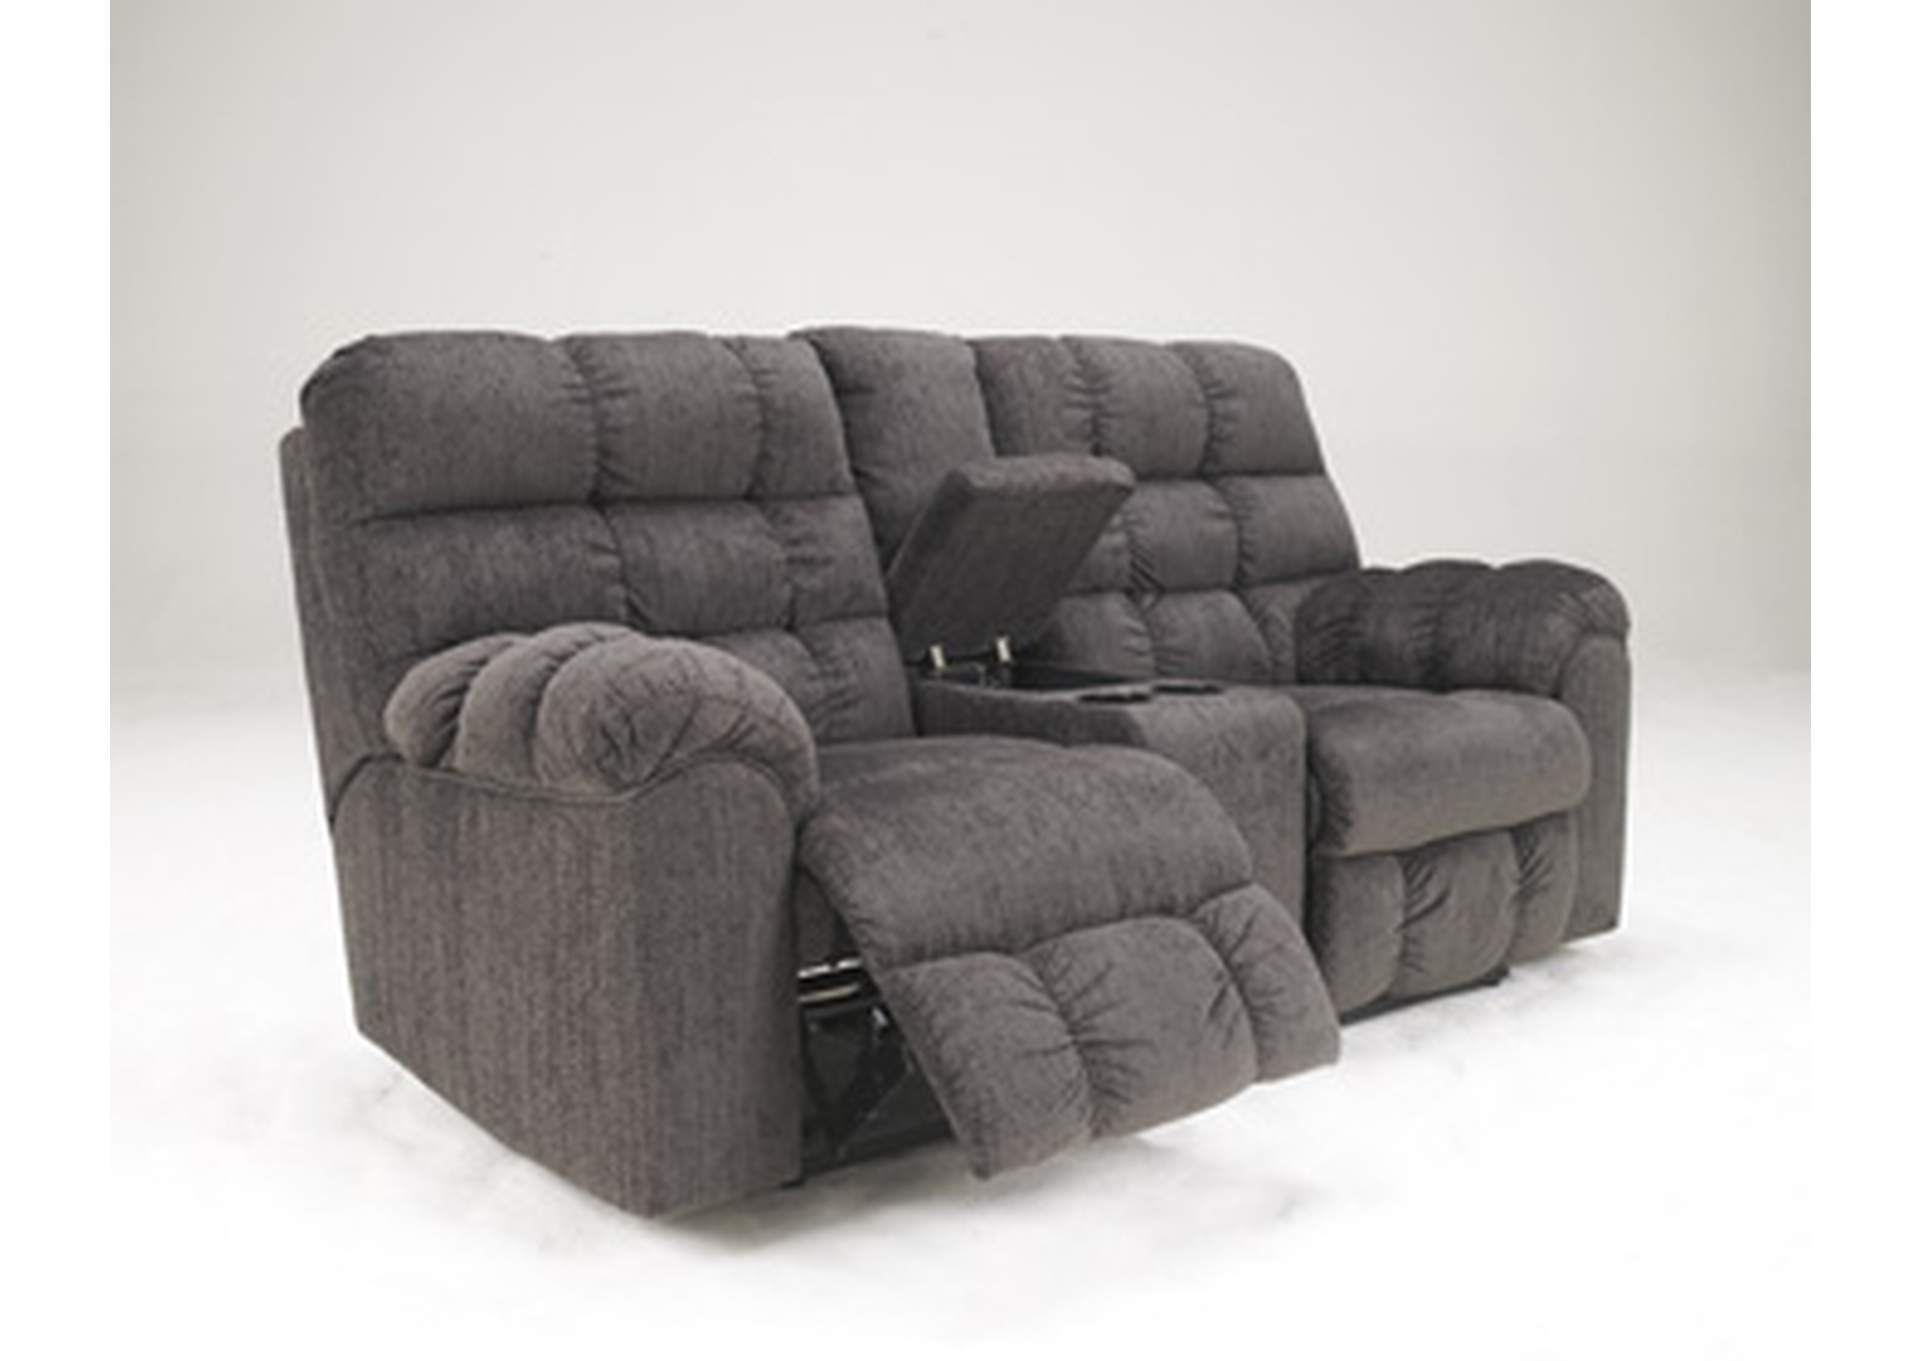 Acieona Reclining Loveseat with Console,Signature Design By Ashley